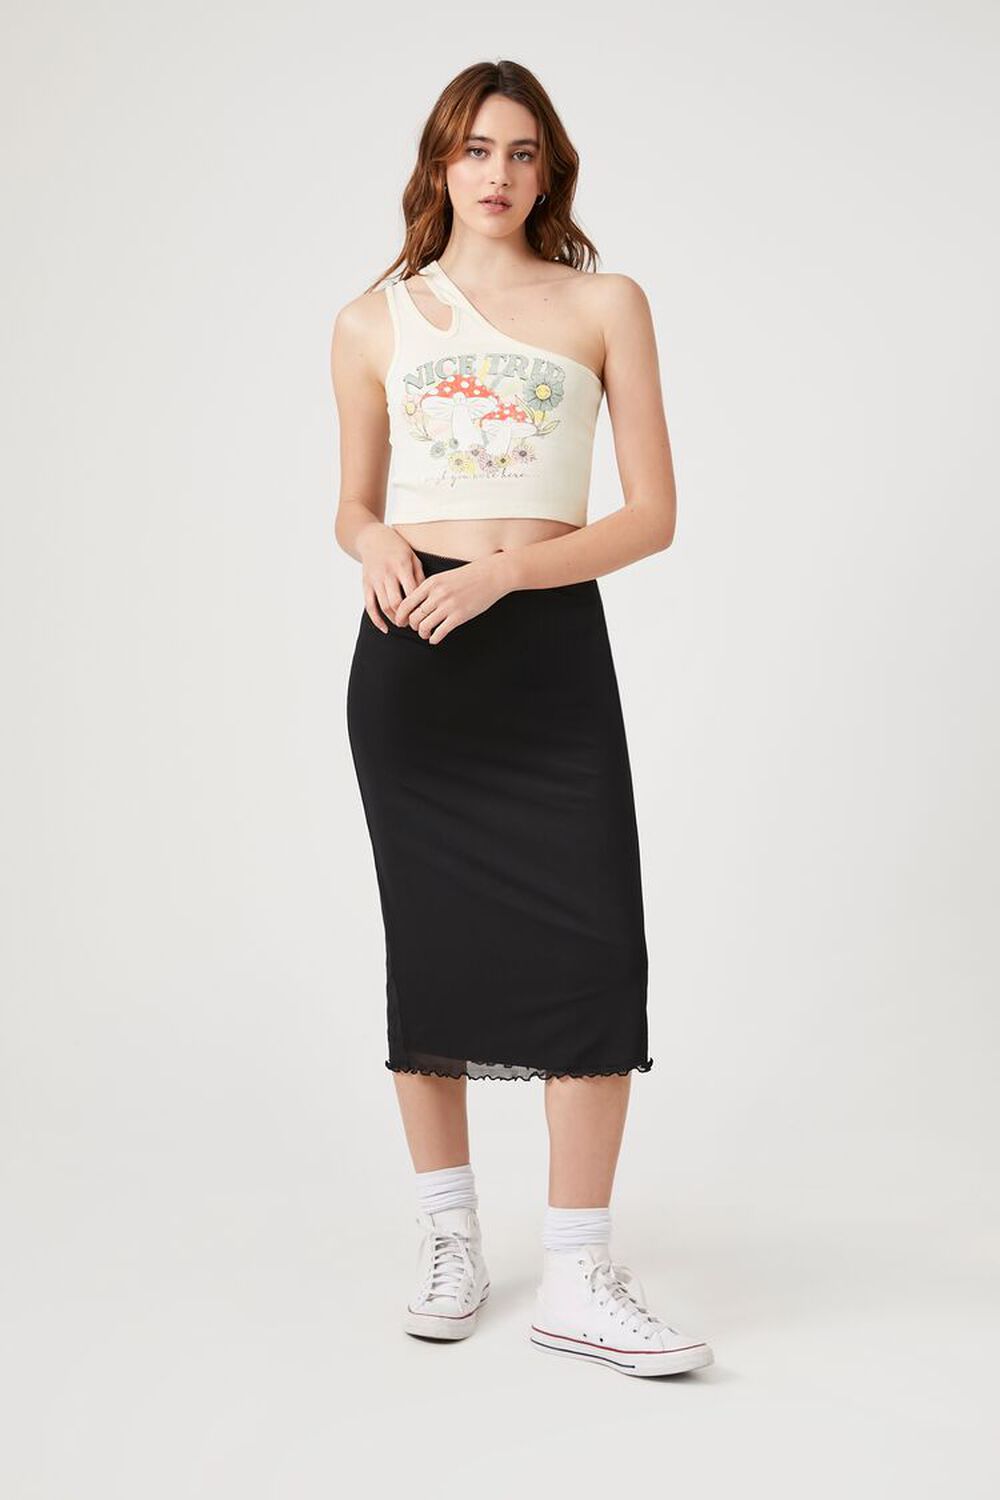 Lettuce-Edge Barbie Tee  Crop top outfits, Chic black outfits, Forever 21  outfits